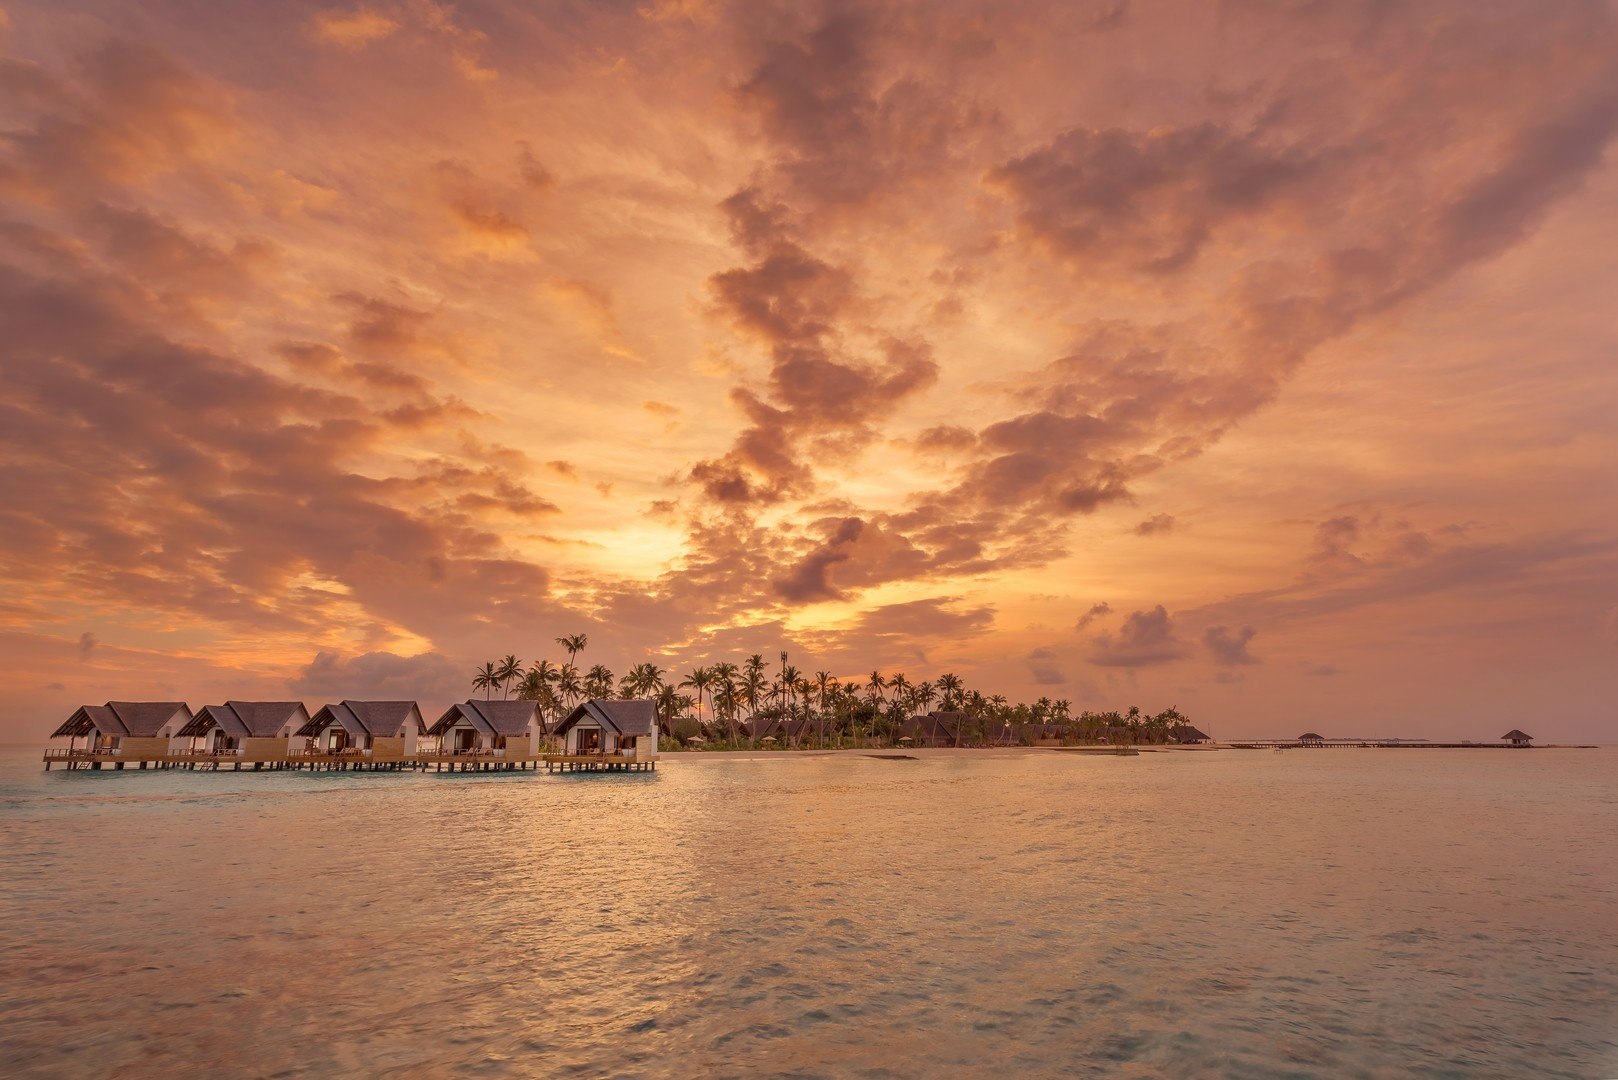 What is so special about the Water Bungalows in Maldives?